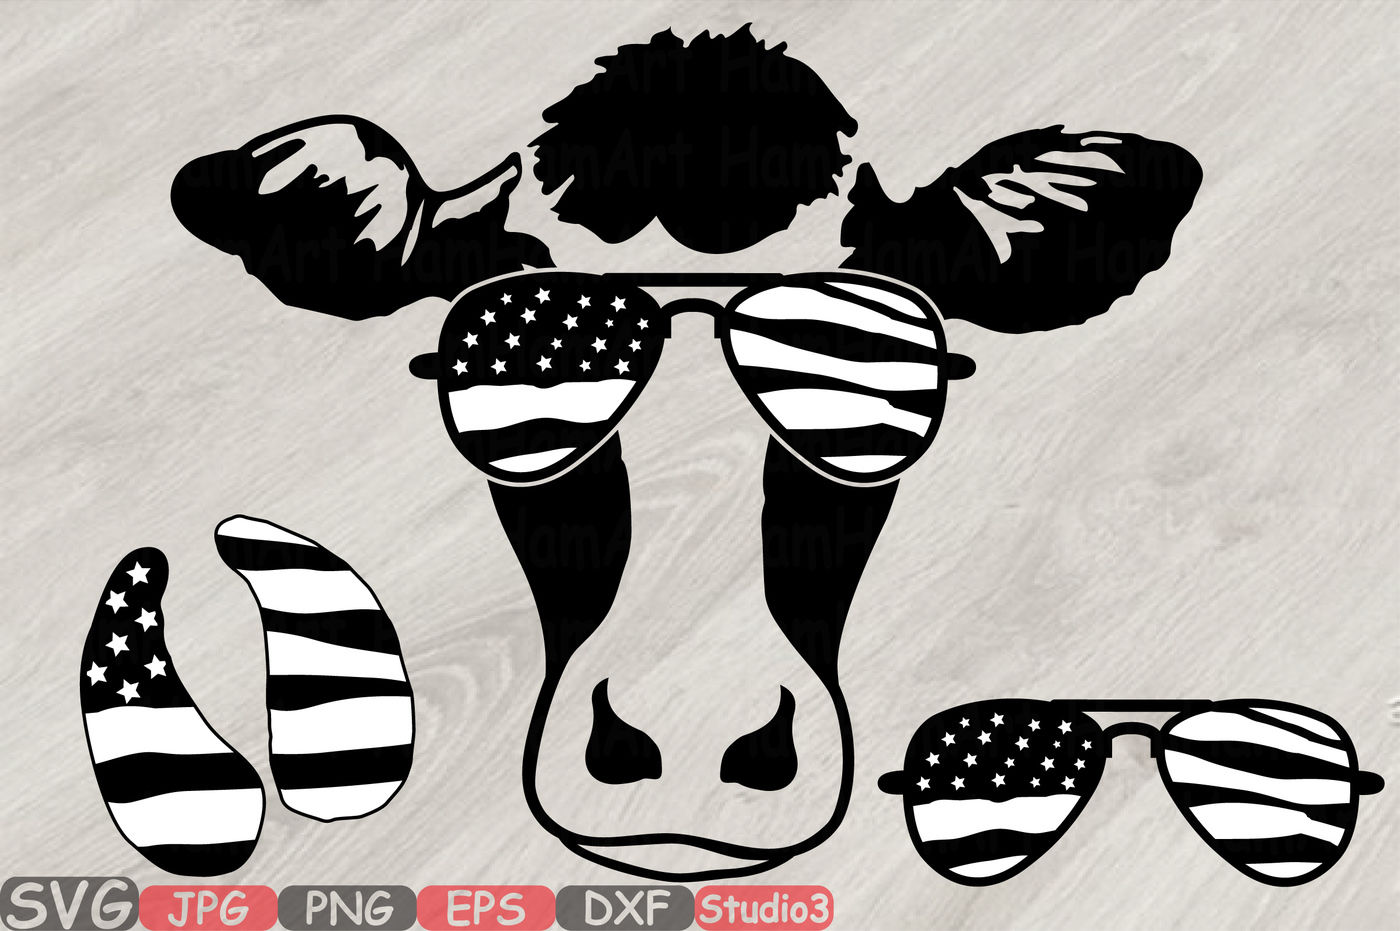 Cow Usa Flag Glasses Silhouette Svg 4th July 833s By Hamhamart Thehungryjpeg Com